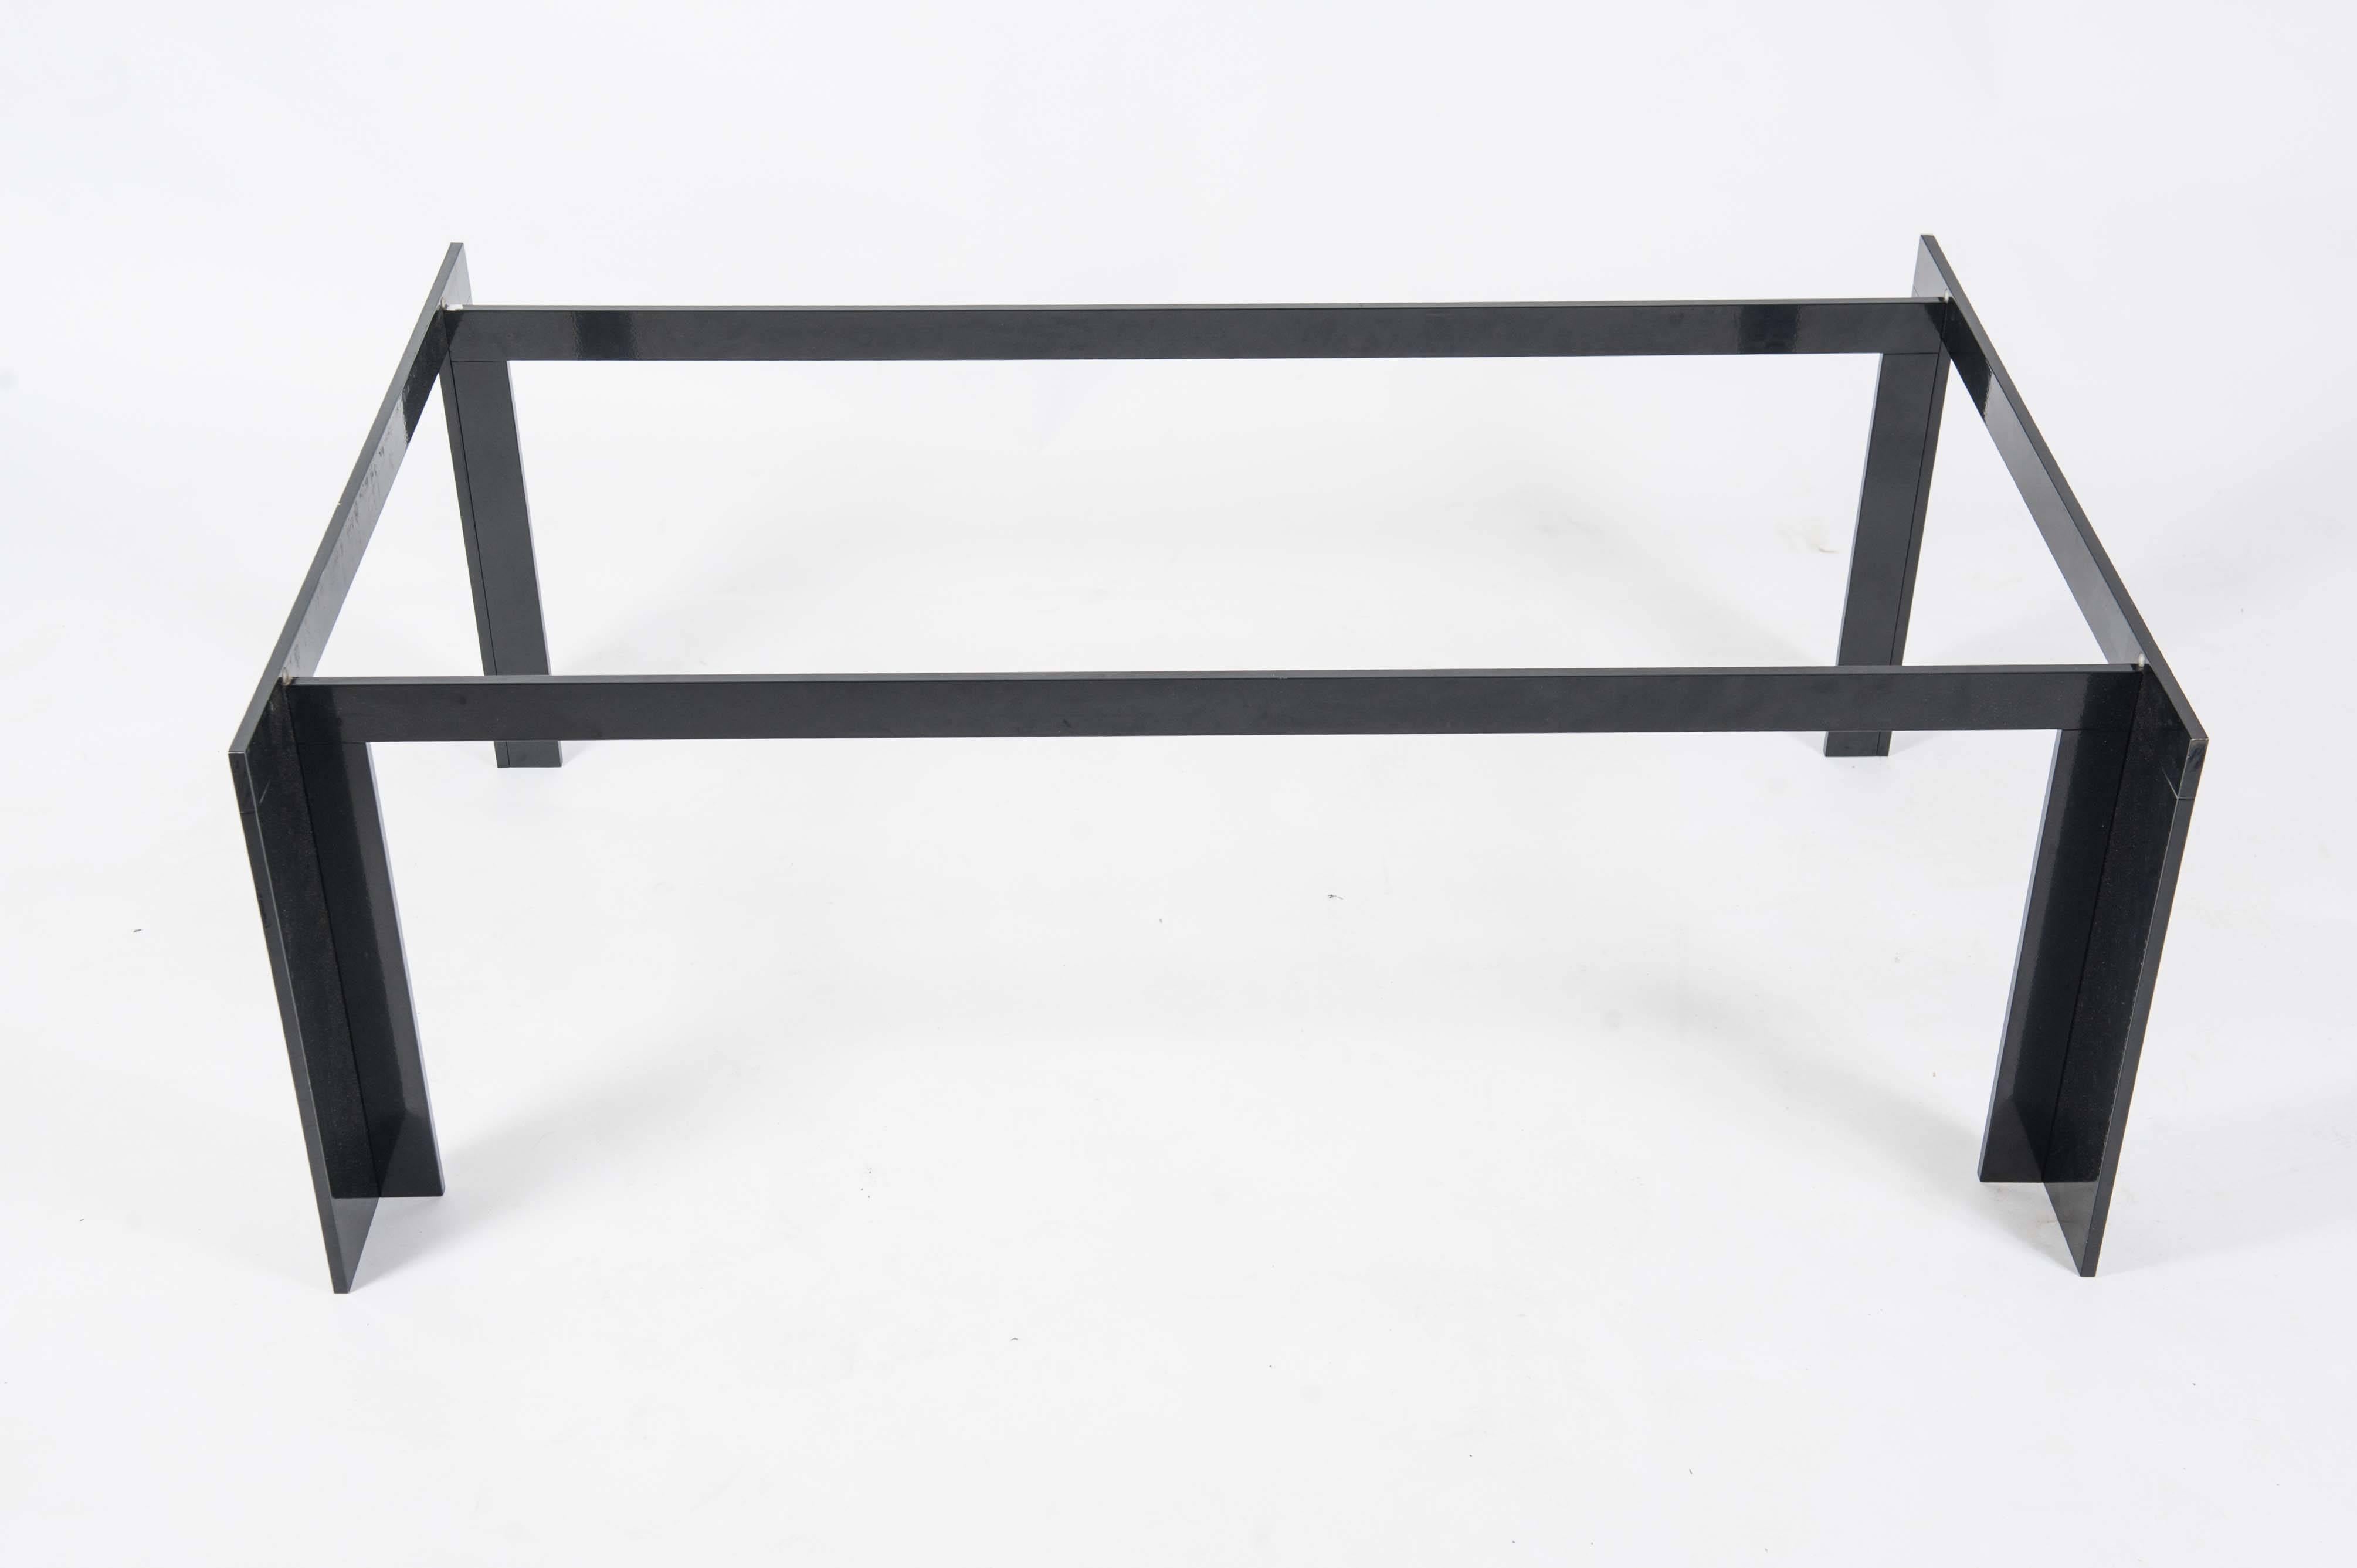 Elegant midcentury coffee table with reinforced grey smoke glass on a black powder coated steel frame.
Suits a lot of interior styles: (post) modern, midcentury, Hollywood Regency, American classical, the Bauhaus, Brutalist, De Stijl, International